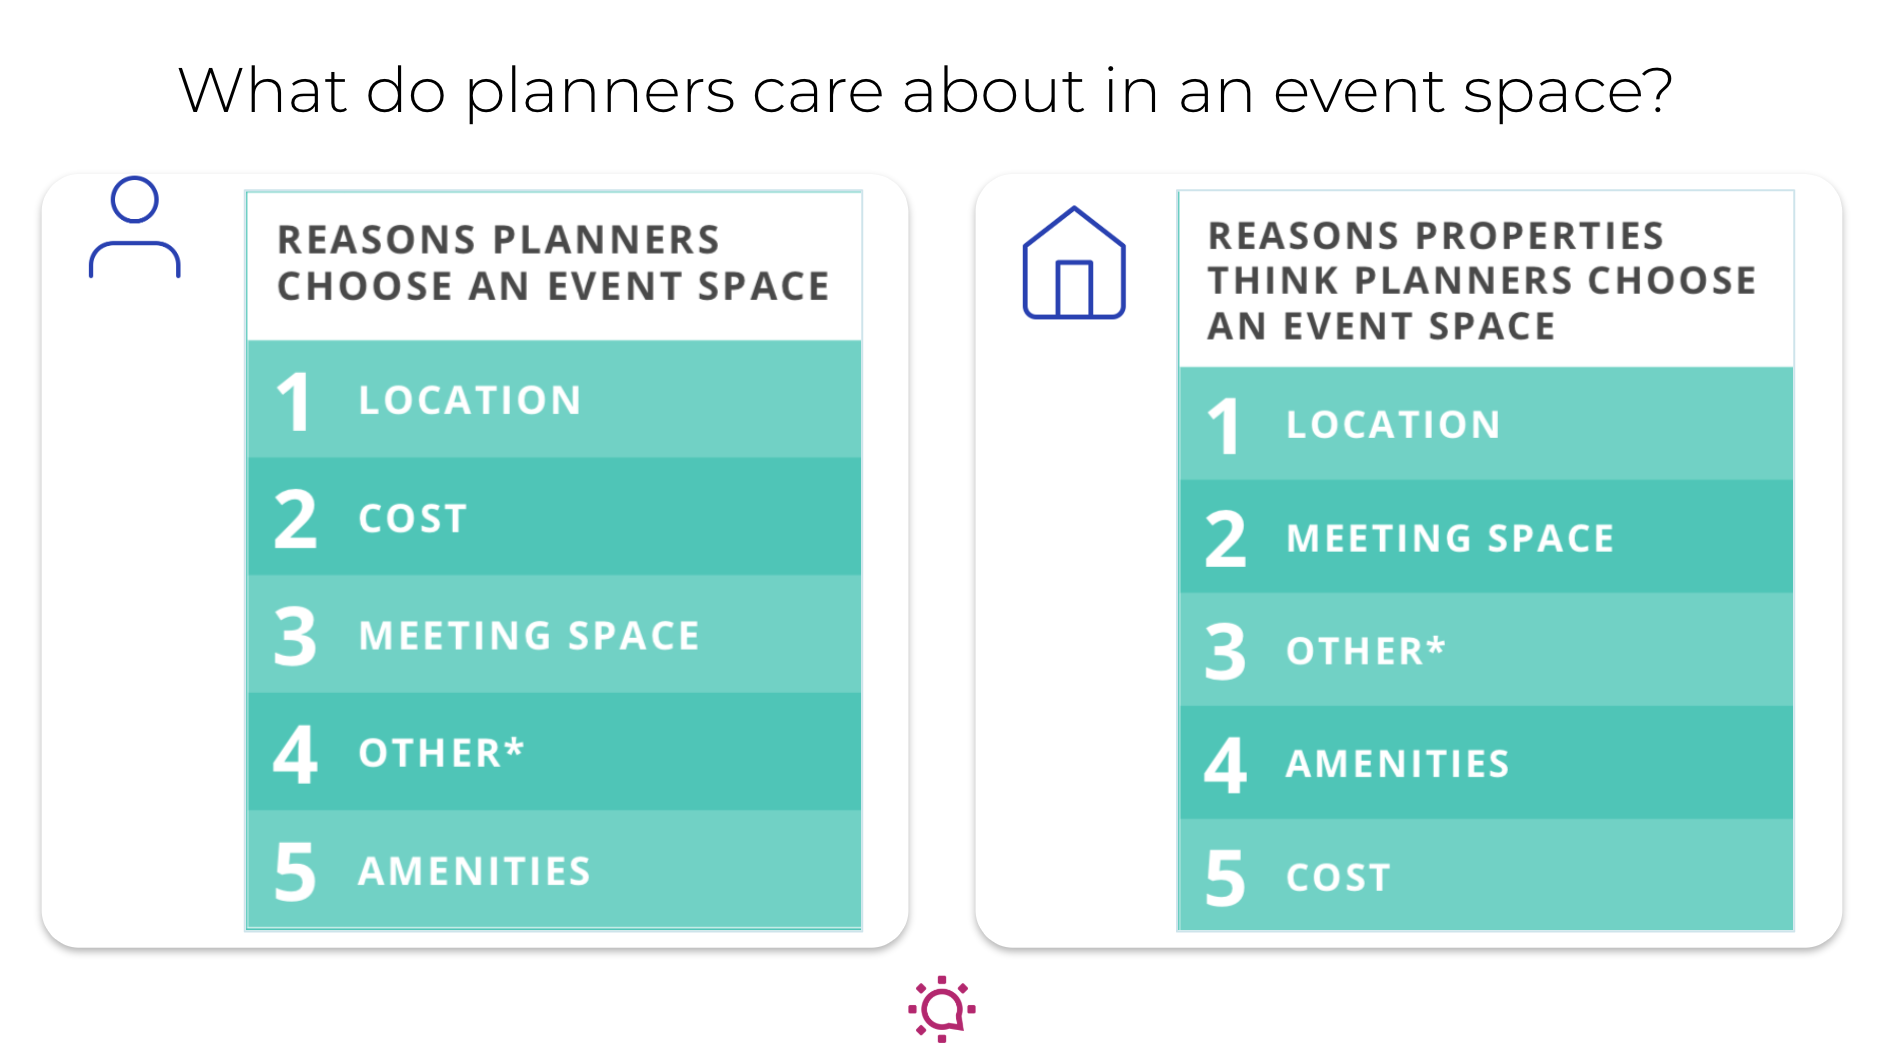 What do planners actually care about in an event space?